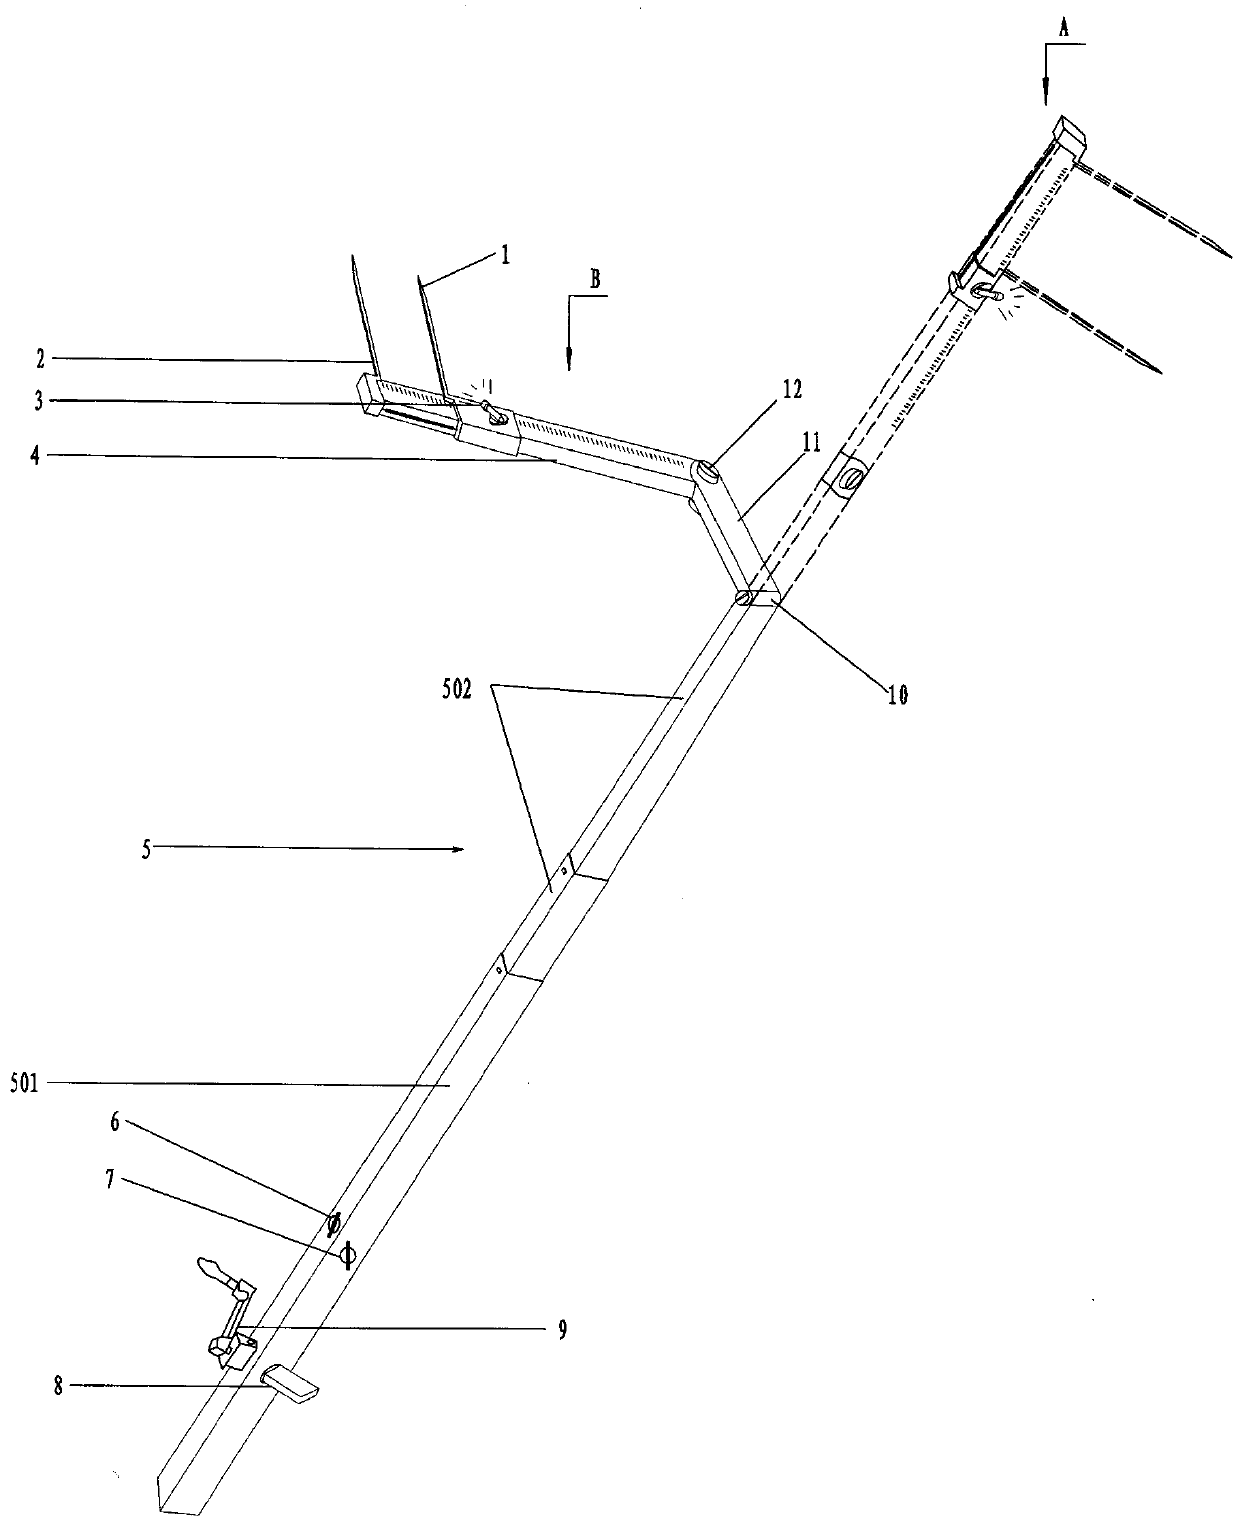 A scalable and visualized large-travel caliper